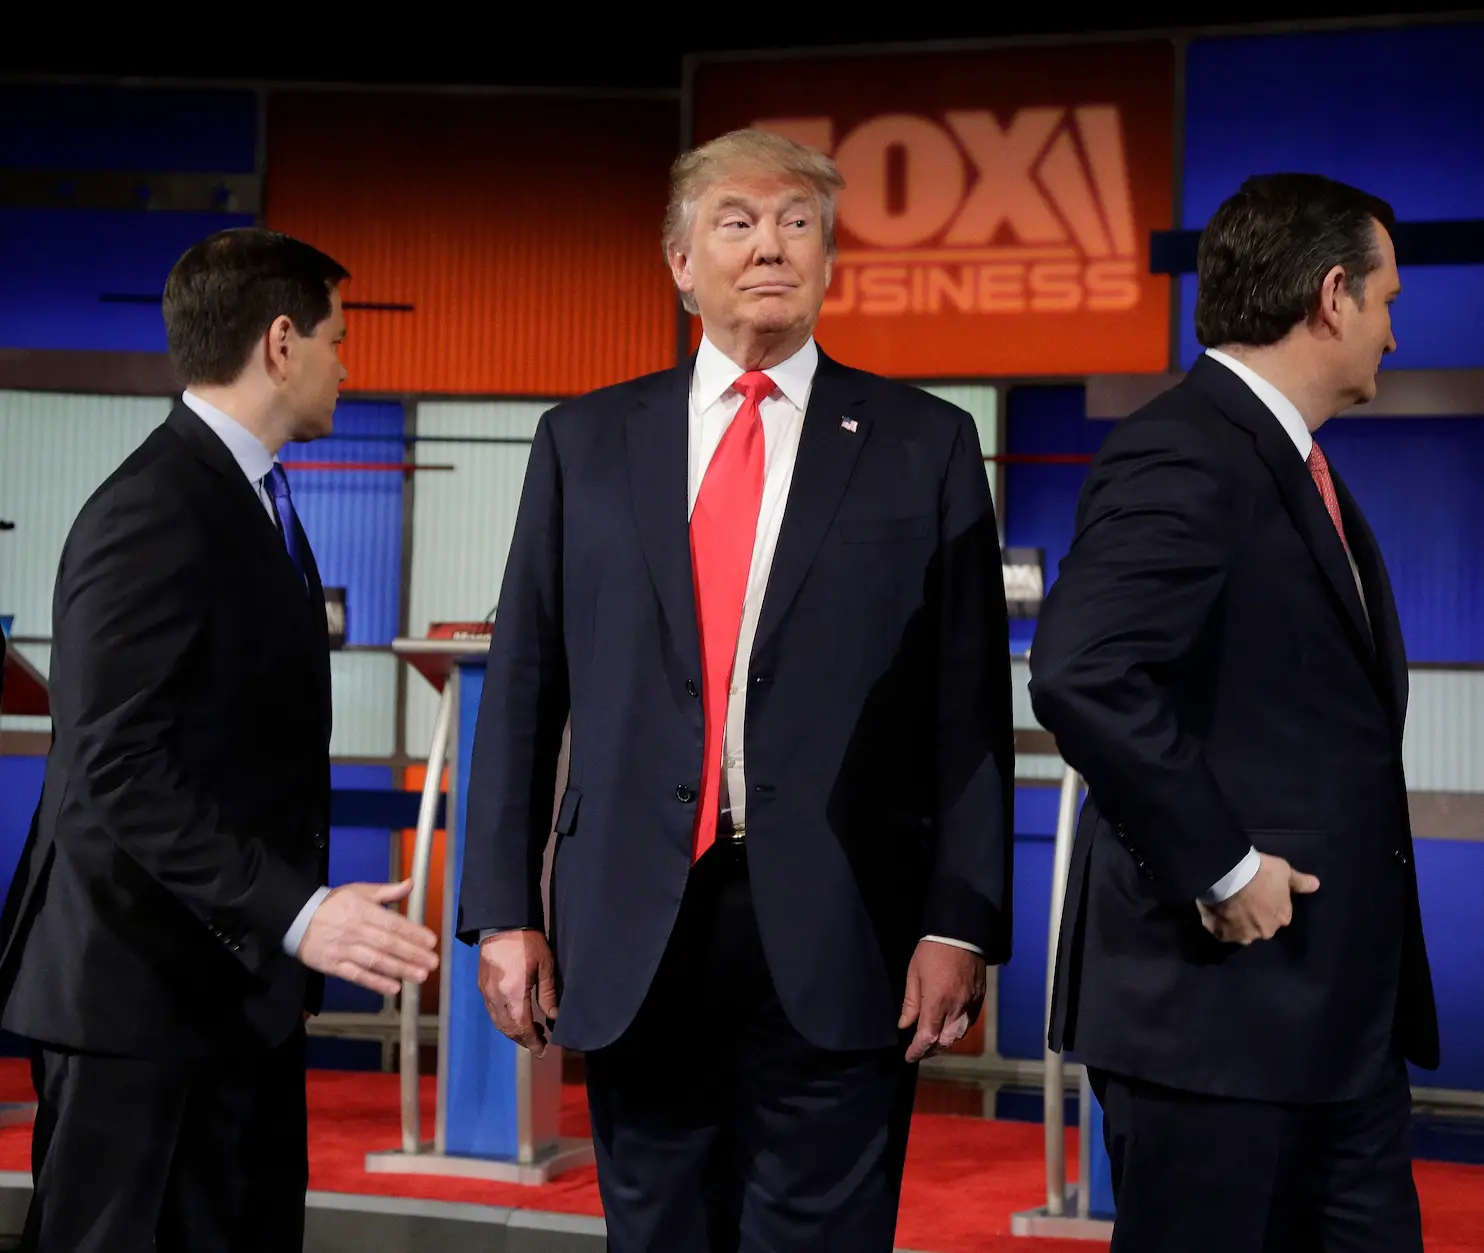 The Take: Can Donald Trump actually be the Republican nominee?